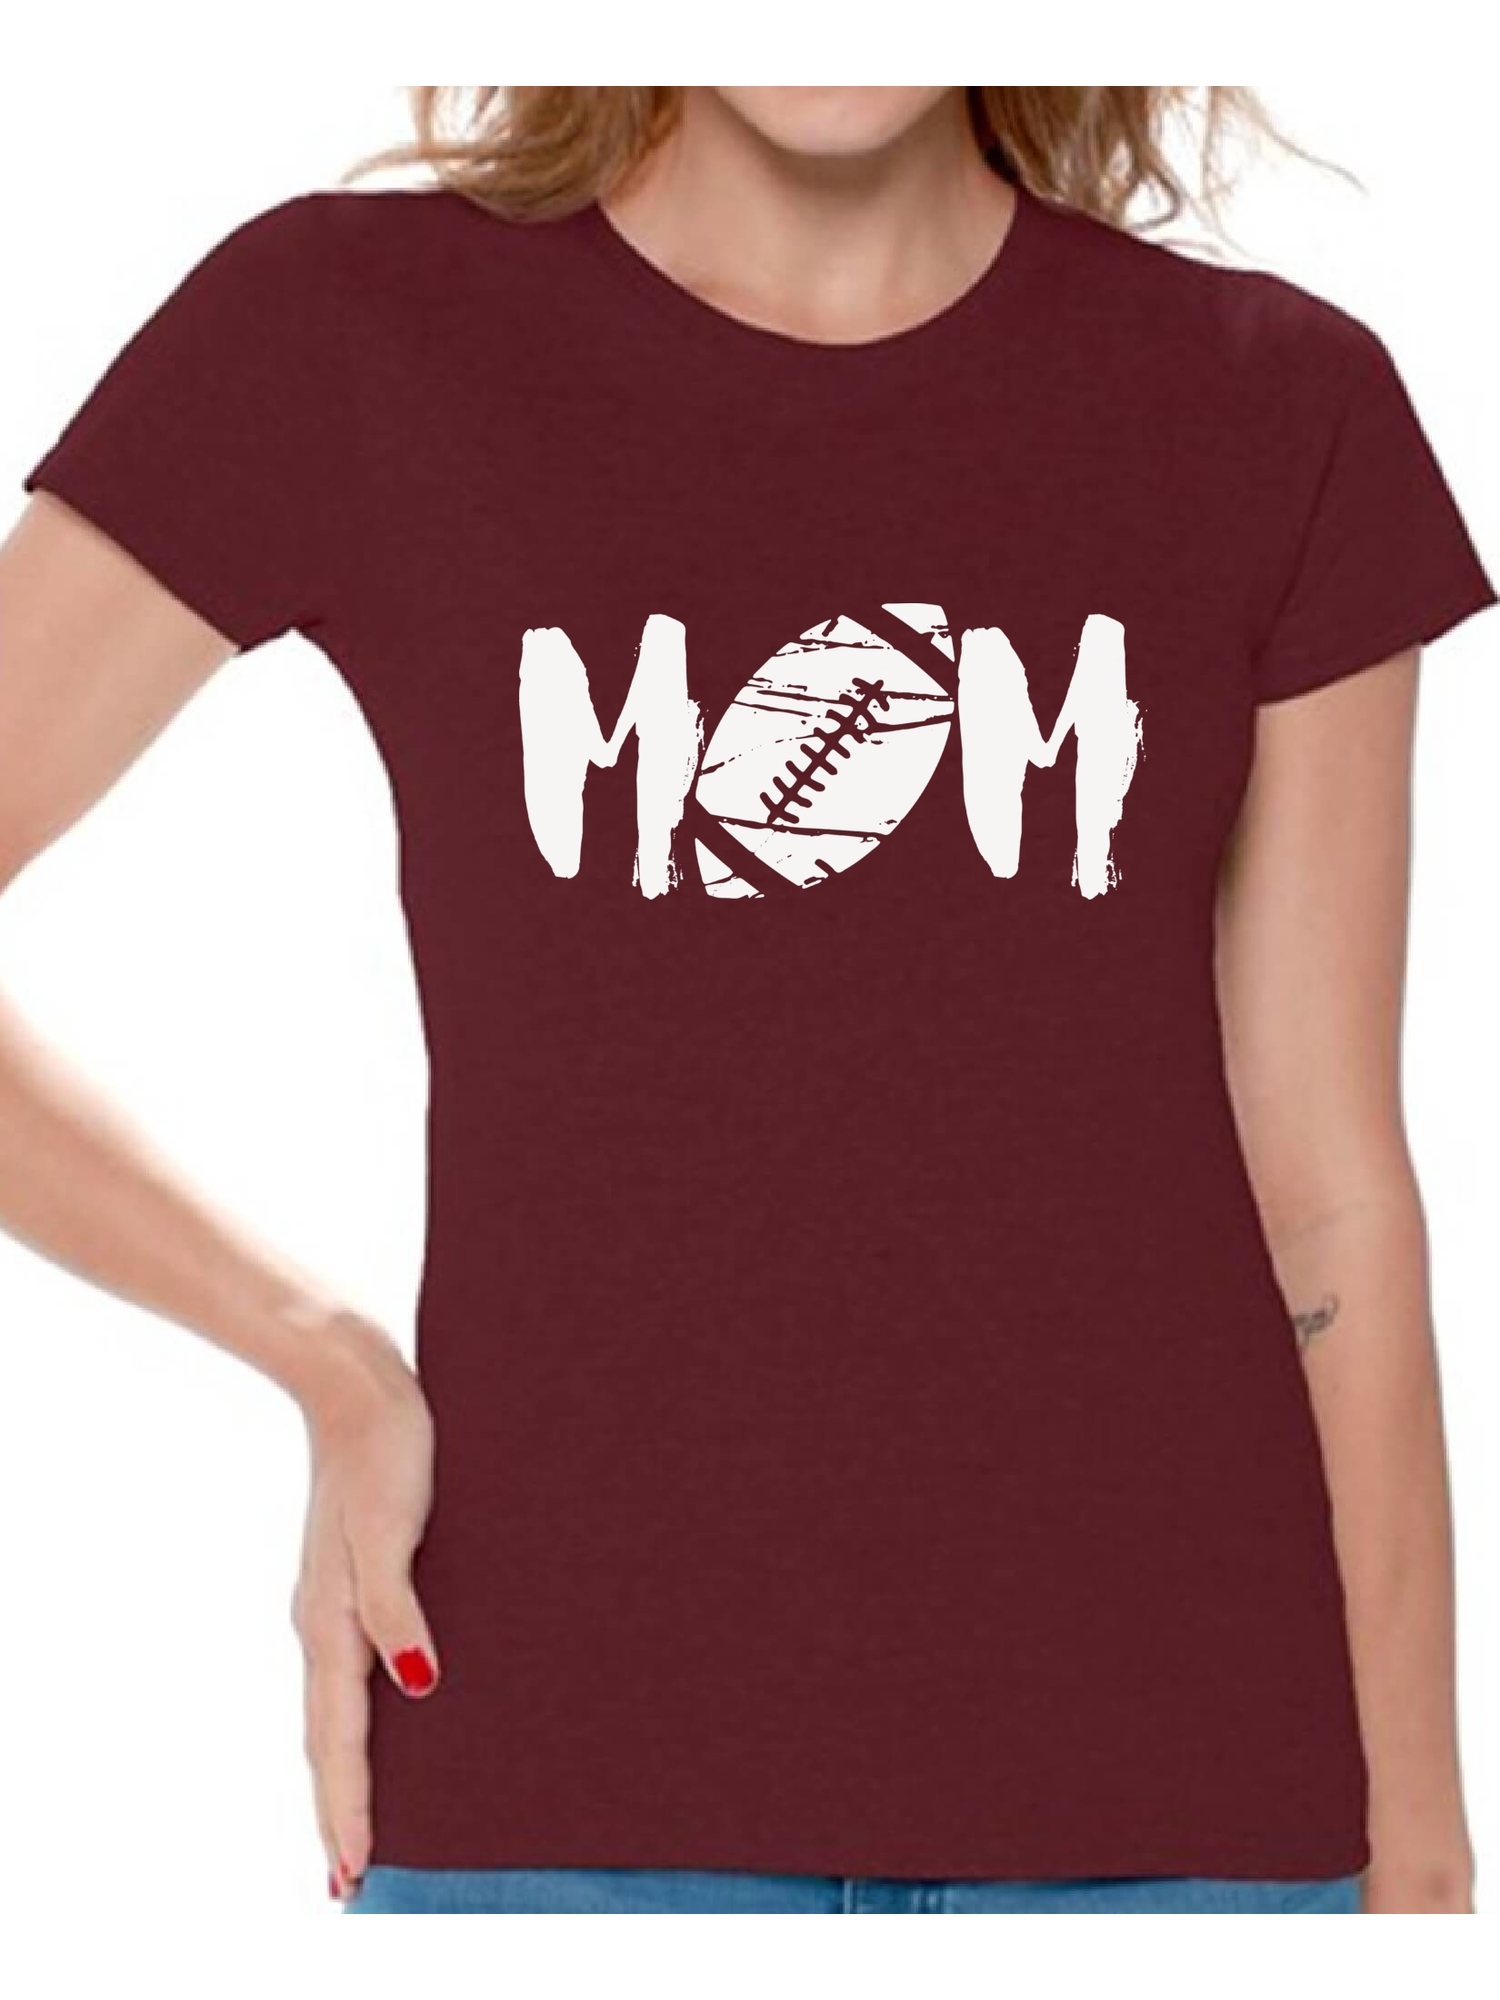 Awkward Styles Women's M-O-M Football Mom Graphic T-shirt Tops White Mother's Day Gift Sports Mom - image 1 of 4